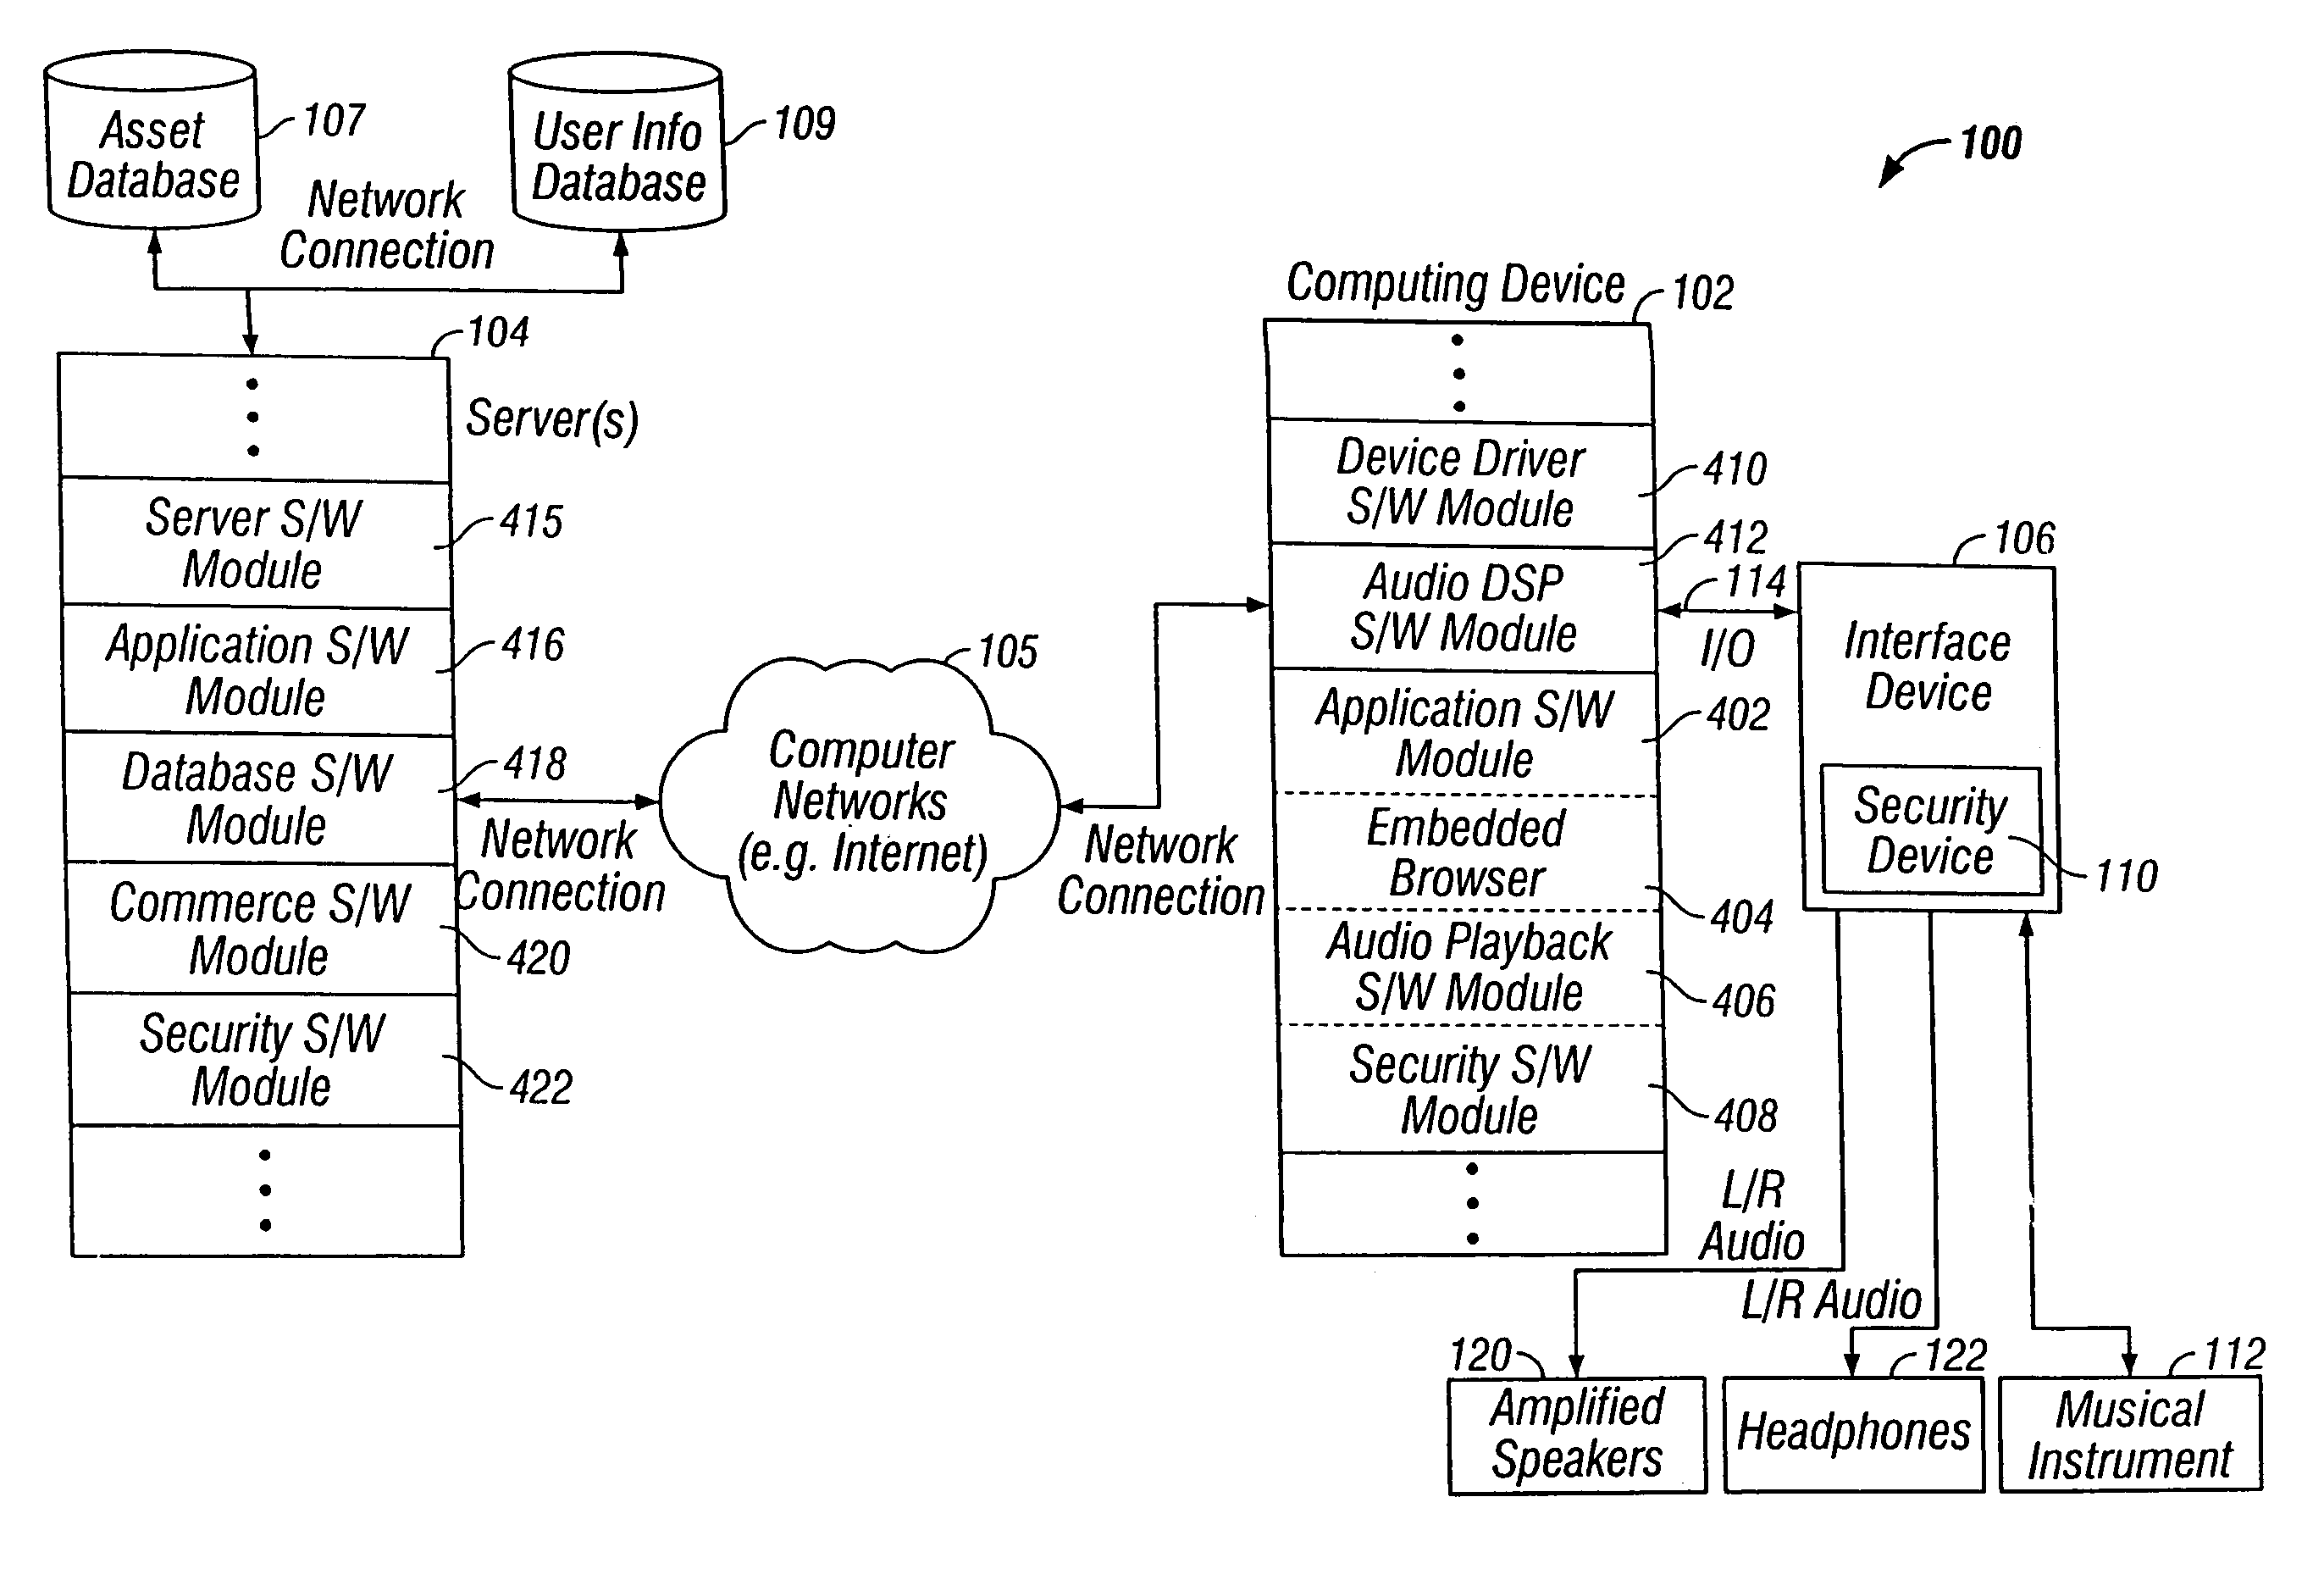 System and method of secure electronic commerce transactions including tracking and recording the distribution and usage of assets